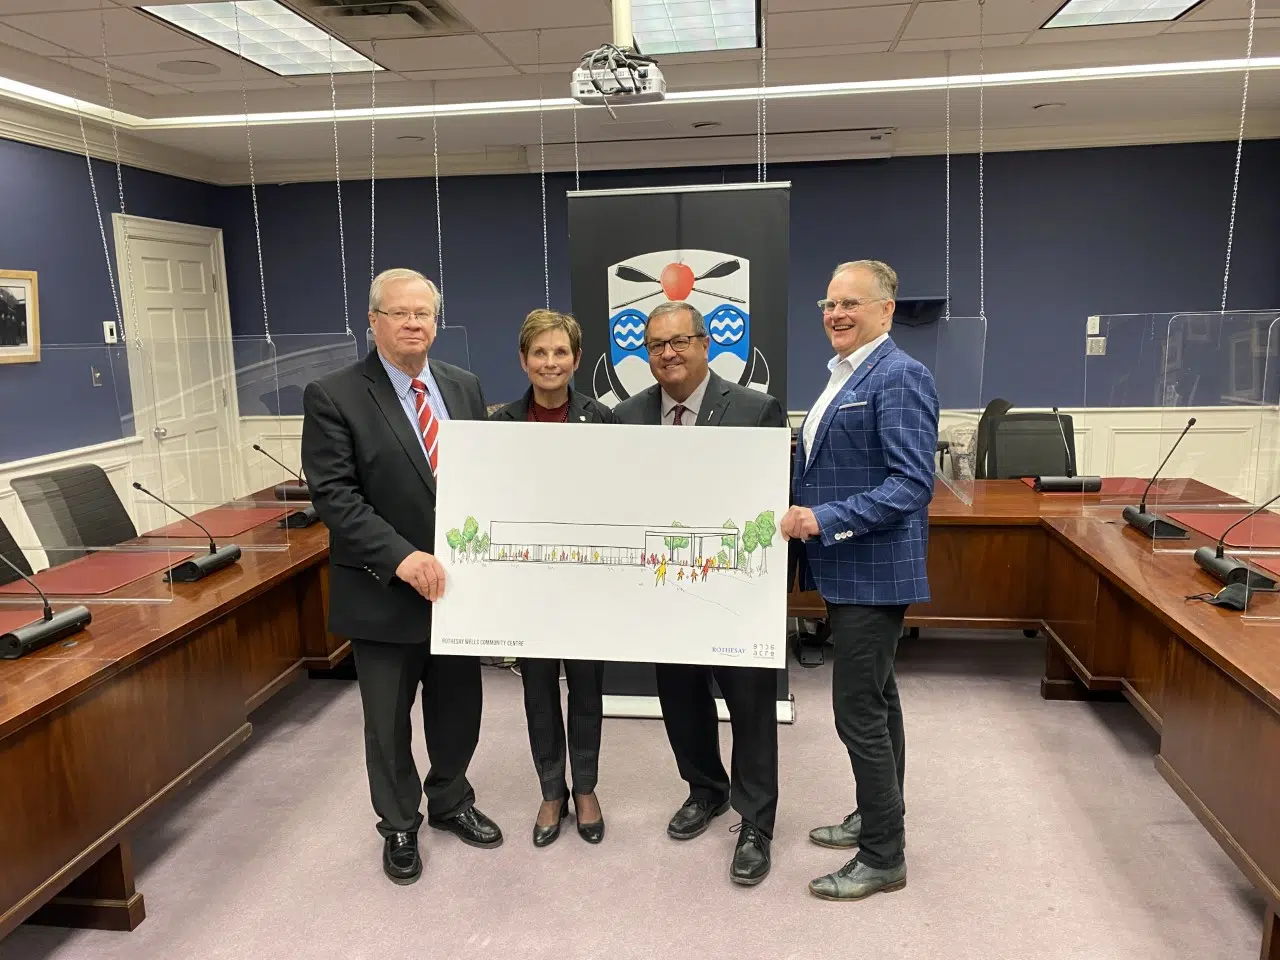 Construction Of New Wells Recreation Park Building In Rothesay Receives Funding